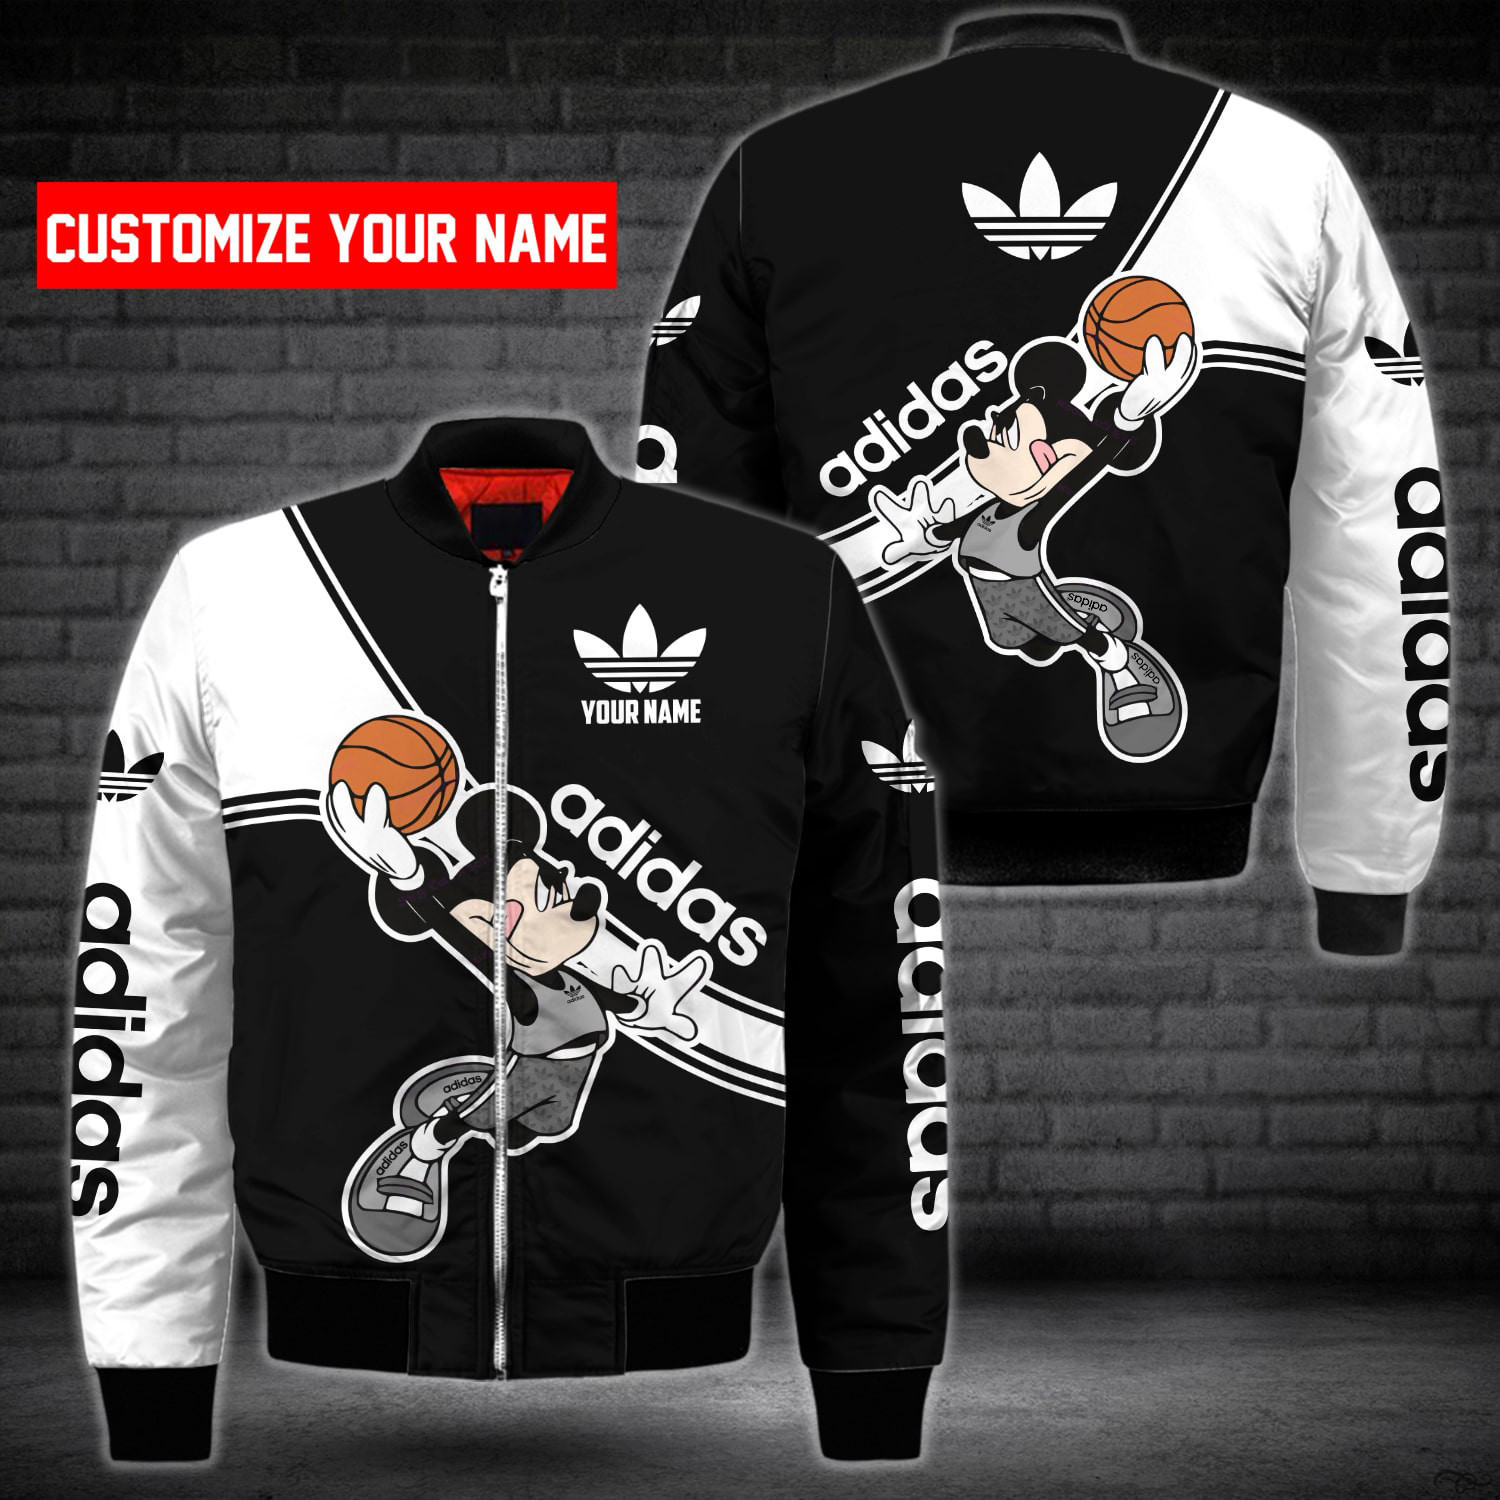 ADD Customize Name Bomber Jacket ADD5800 Ver 5 Bomber